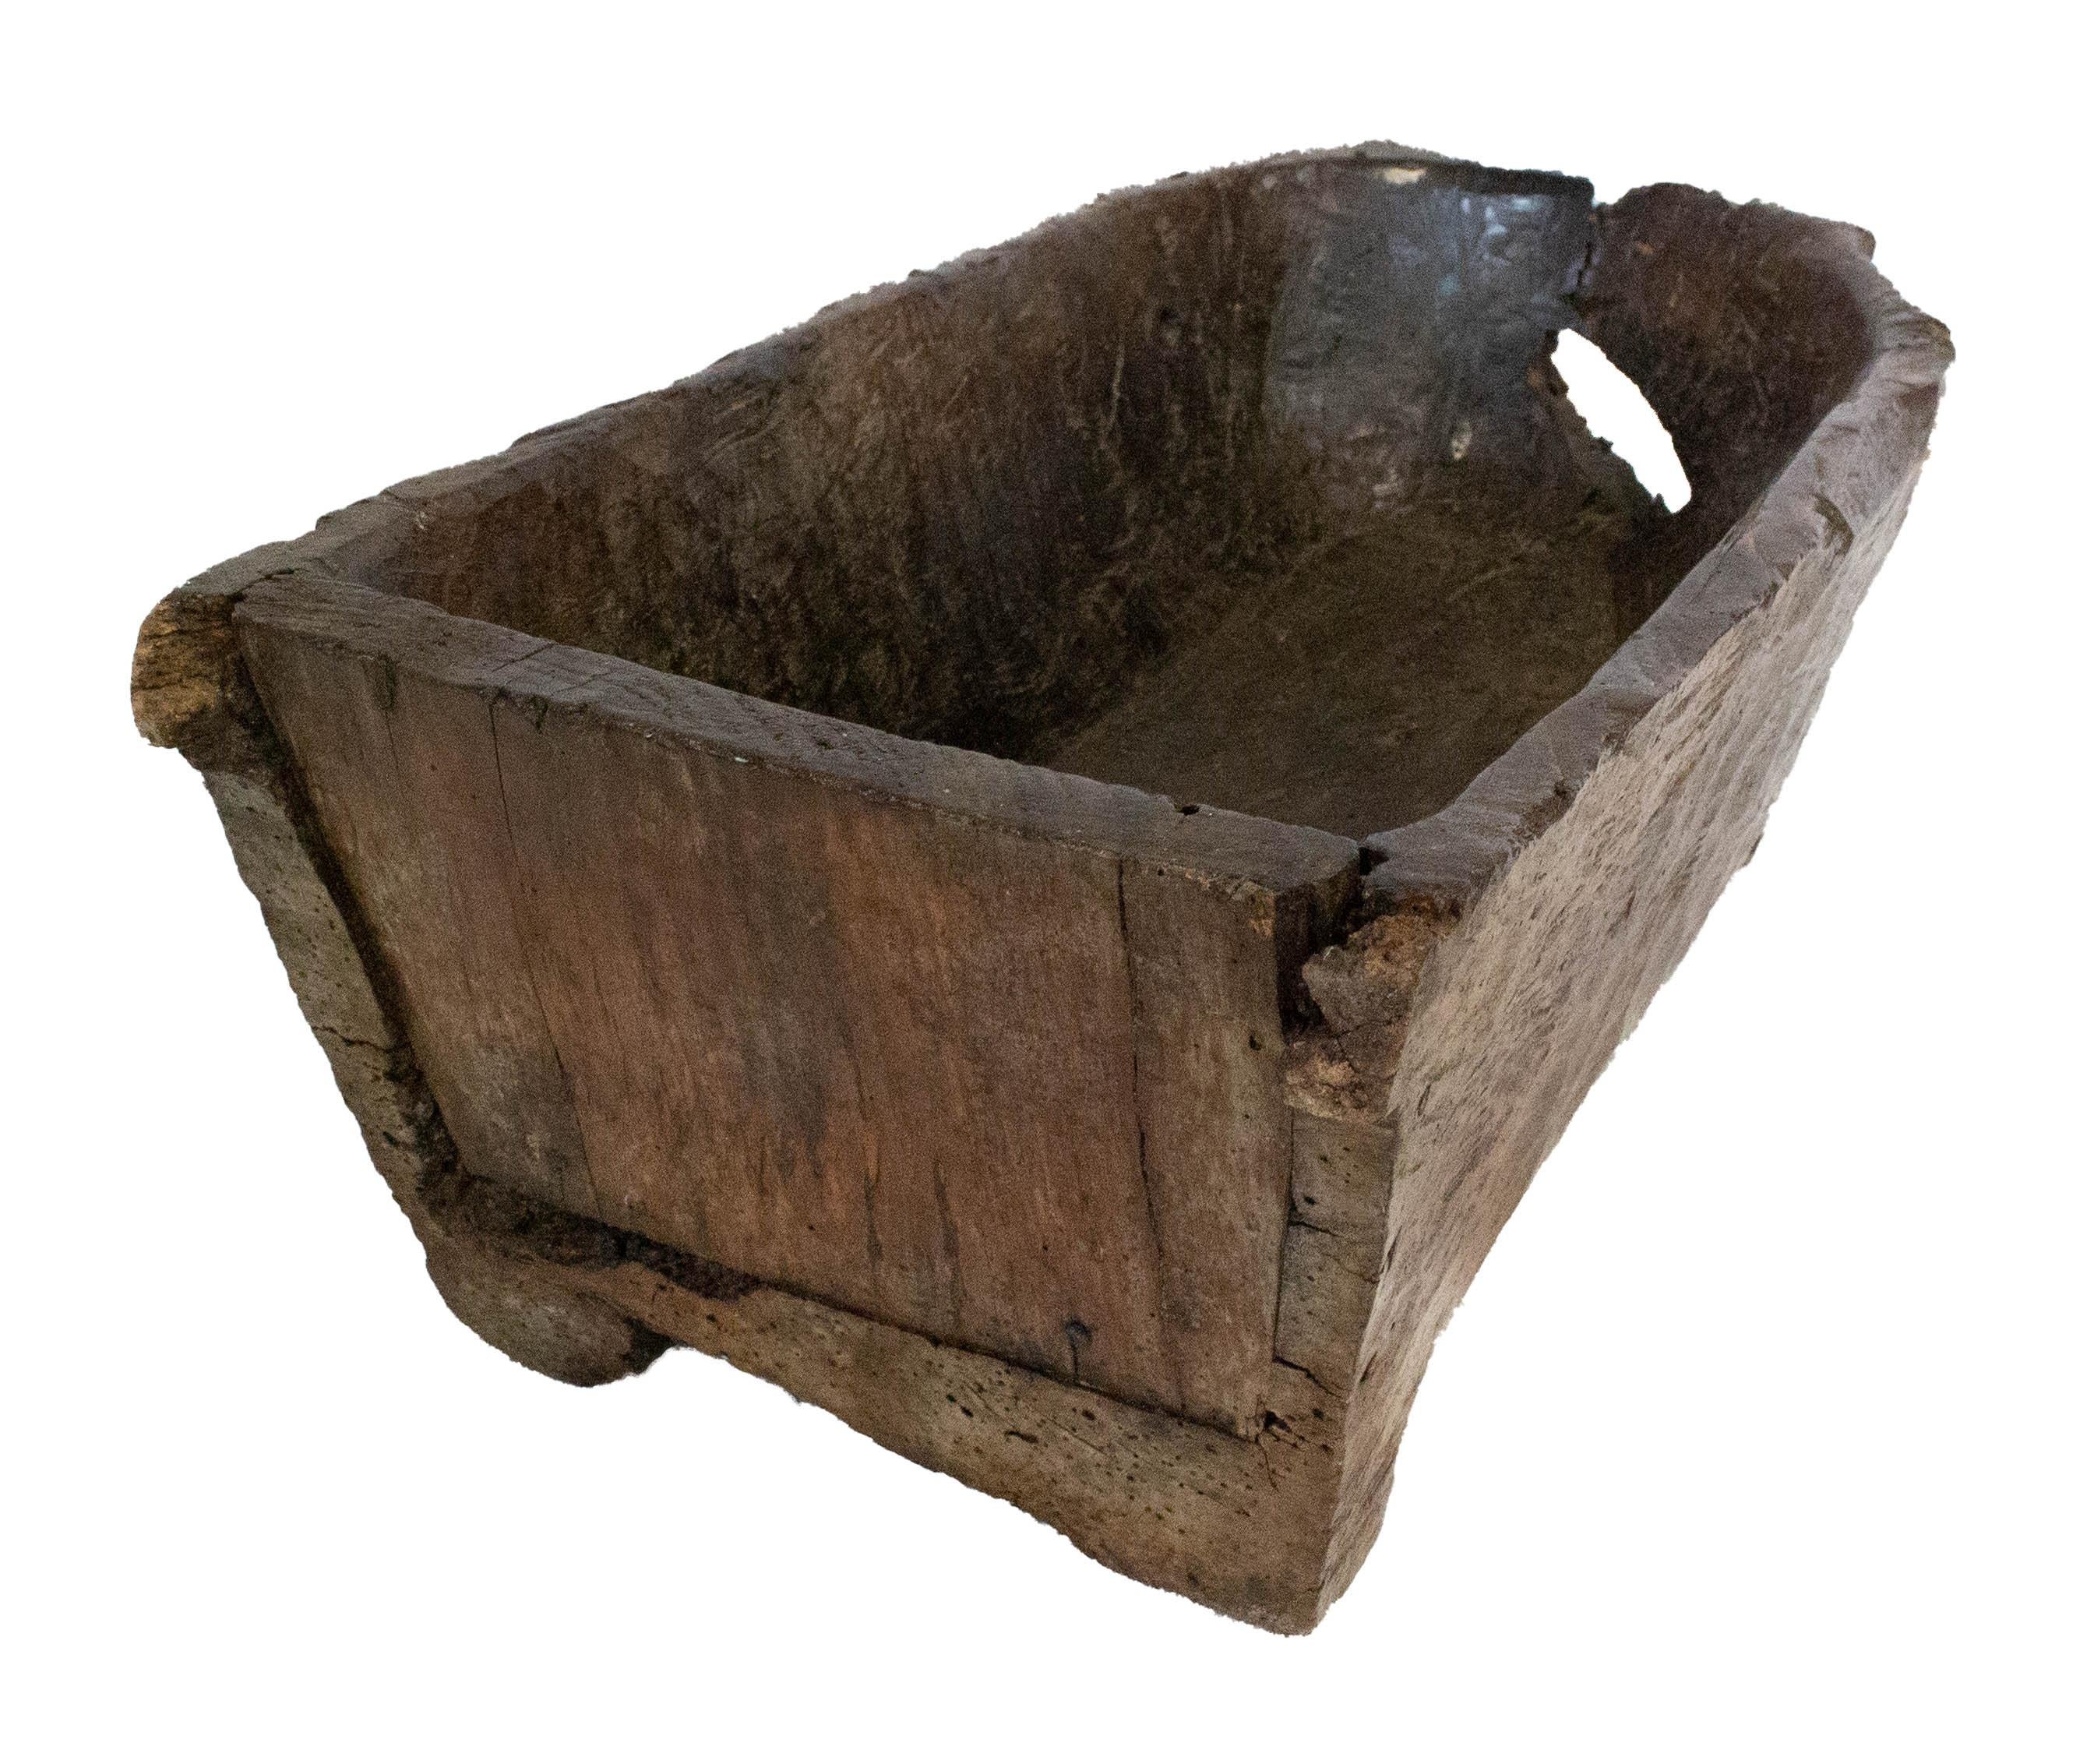 Antique French fountain basin can be used as a planter or jardinière
This item also may have served of children bath tub
Very old, the wood working technique suggests also the work of a clog maker
Lot of mystery for this old furniture witch can also